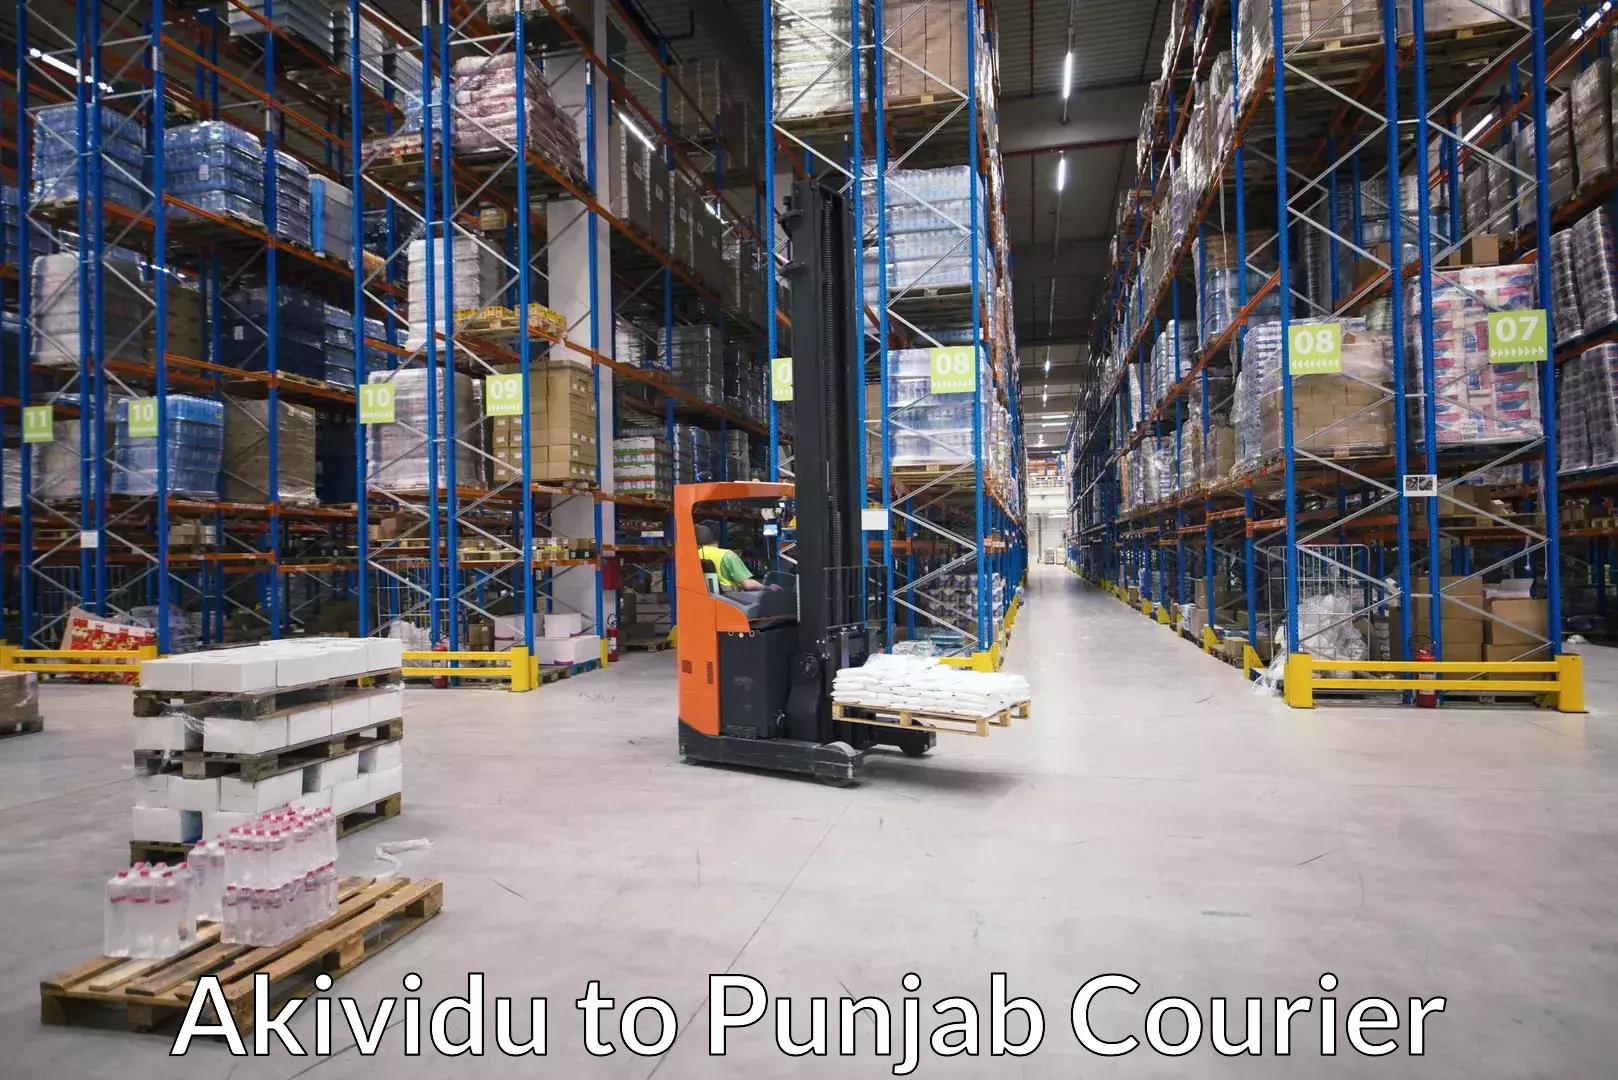 Professional movers and packers Akividu to Punjab